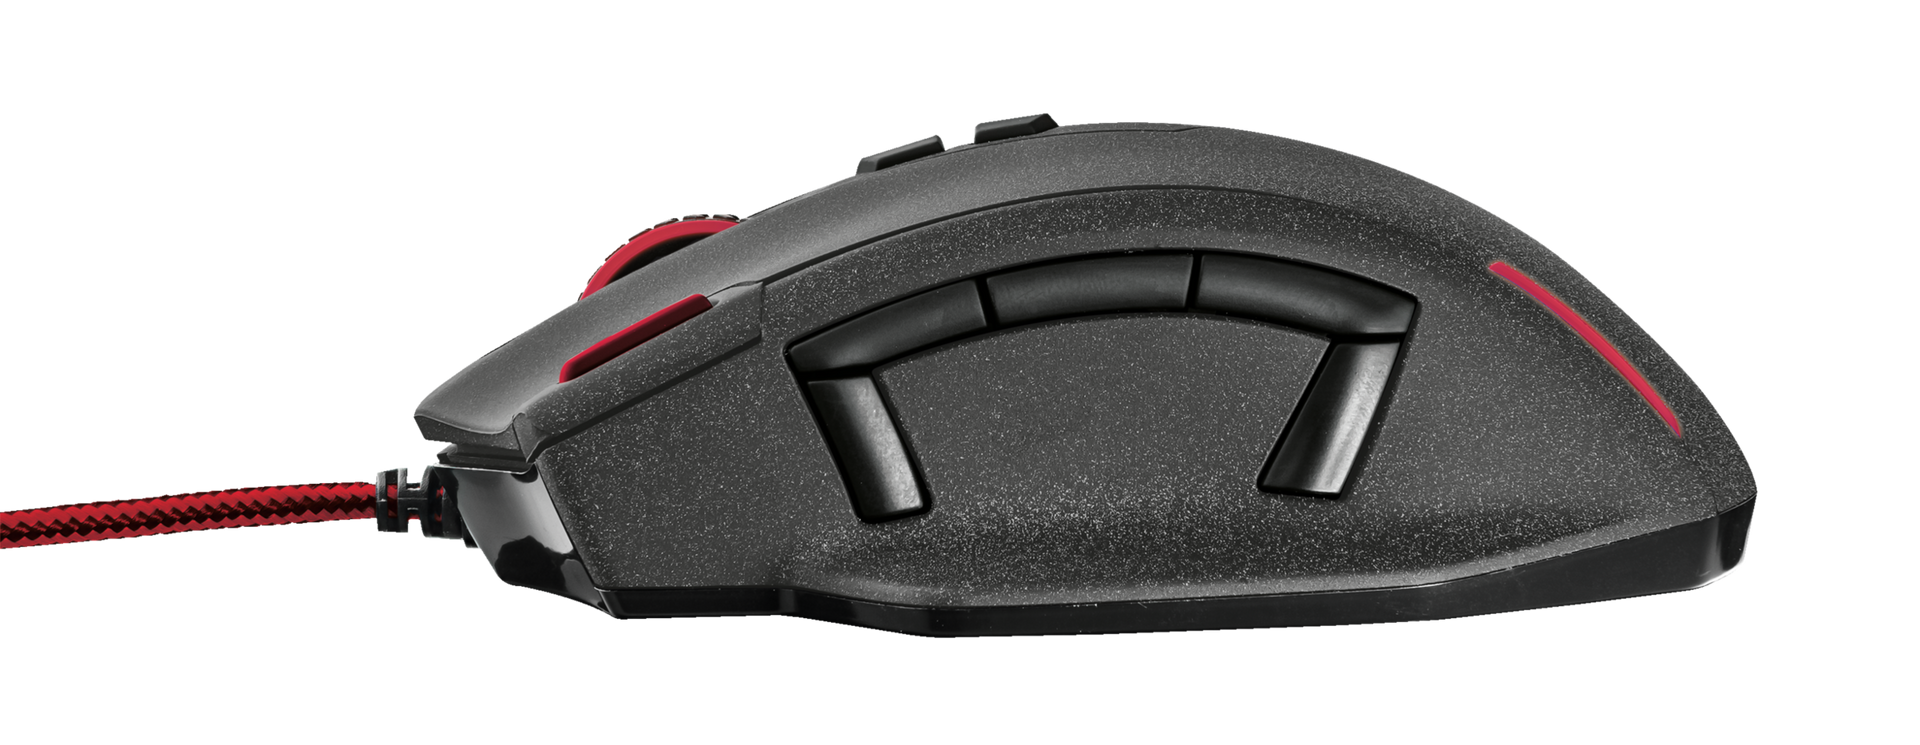 GMS-505 Gaming Mouse-Side